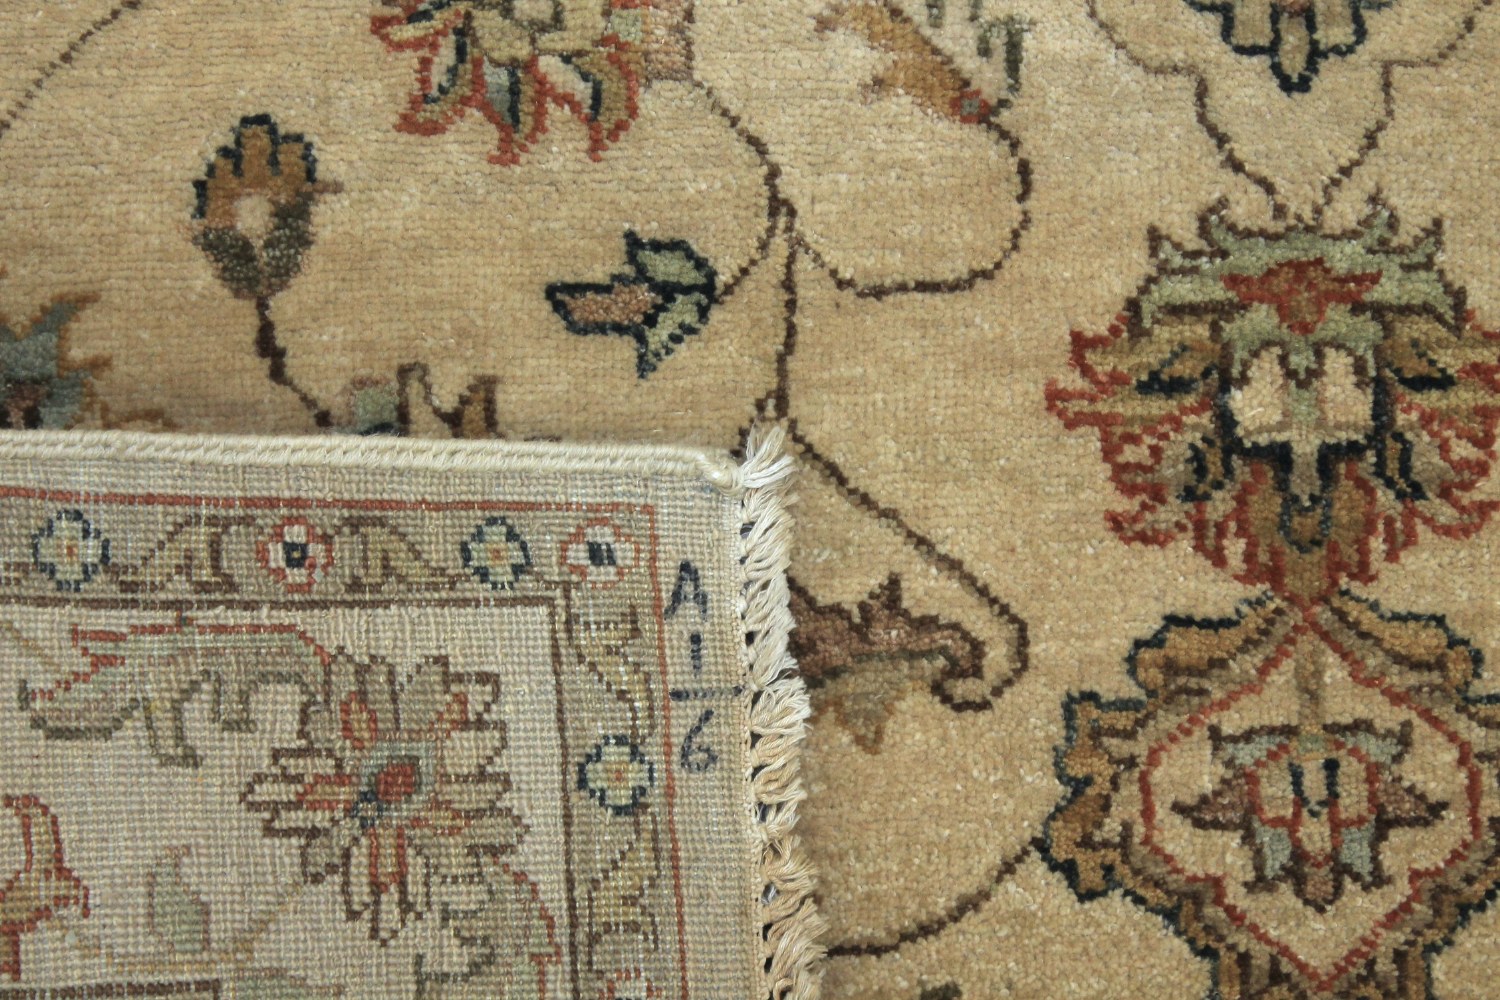 4x6 Traditional Hand Knotted Wool Area Rug - MR14708